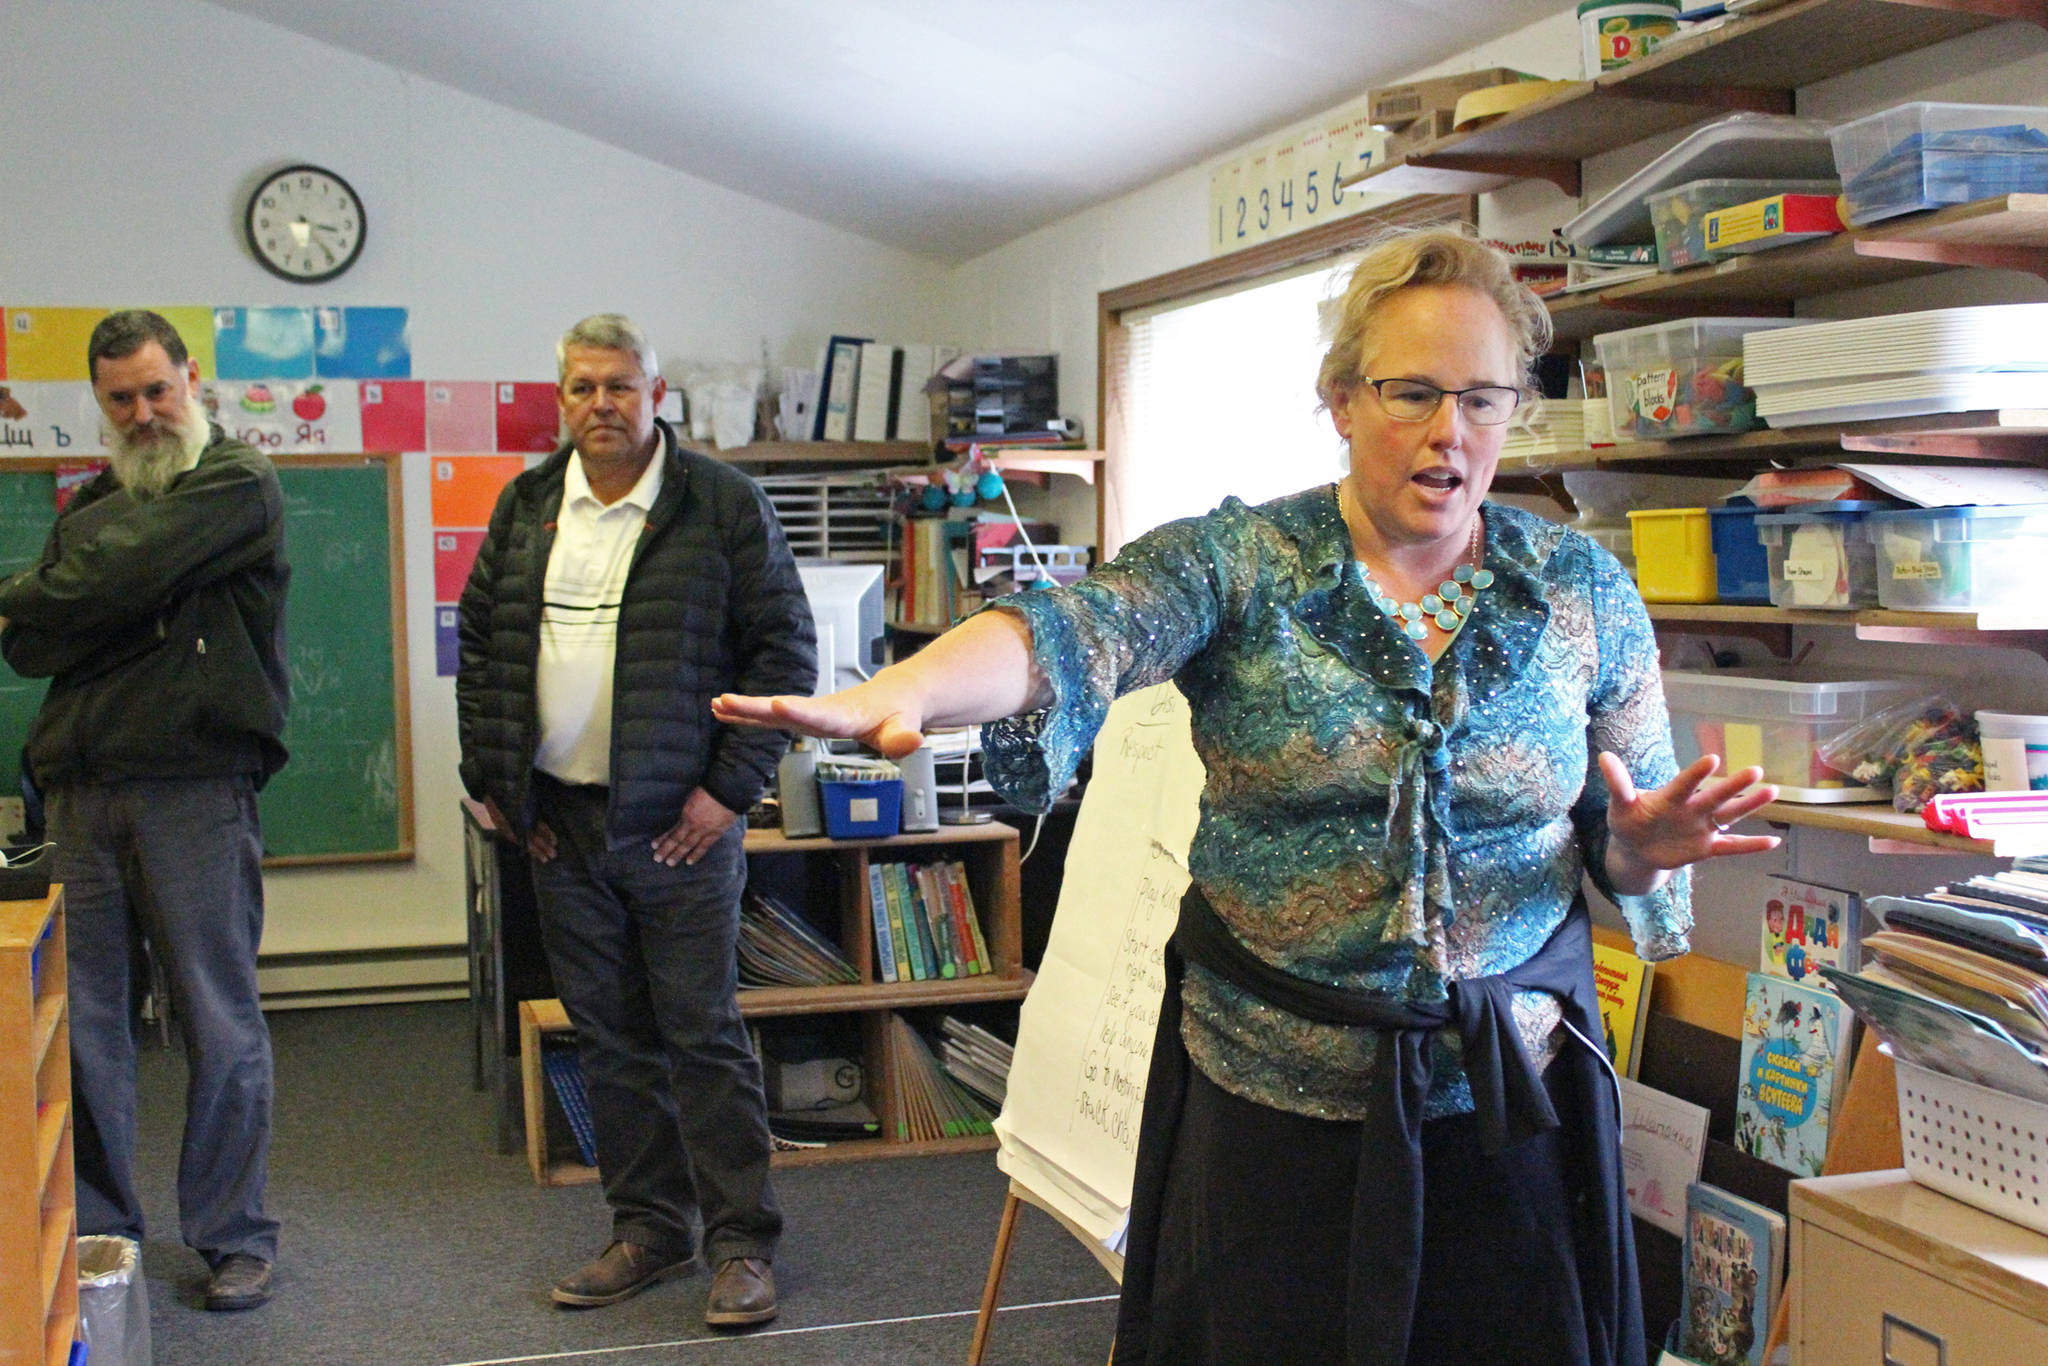 Alana Greear, an elementary school teacher at Kachemak Selo School, shows visitors from the Kenai Peninsula Borough and school district where one of the two elementary buildings has experienced flooding over the years during a visit Thursday, Aug. 30, 2018 in Kachemak Selo, Alaska. The building Greear teaches in also has a wall that lifts up and separates from the floor during winter. (Photo by Megan Pacer/Homer News)